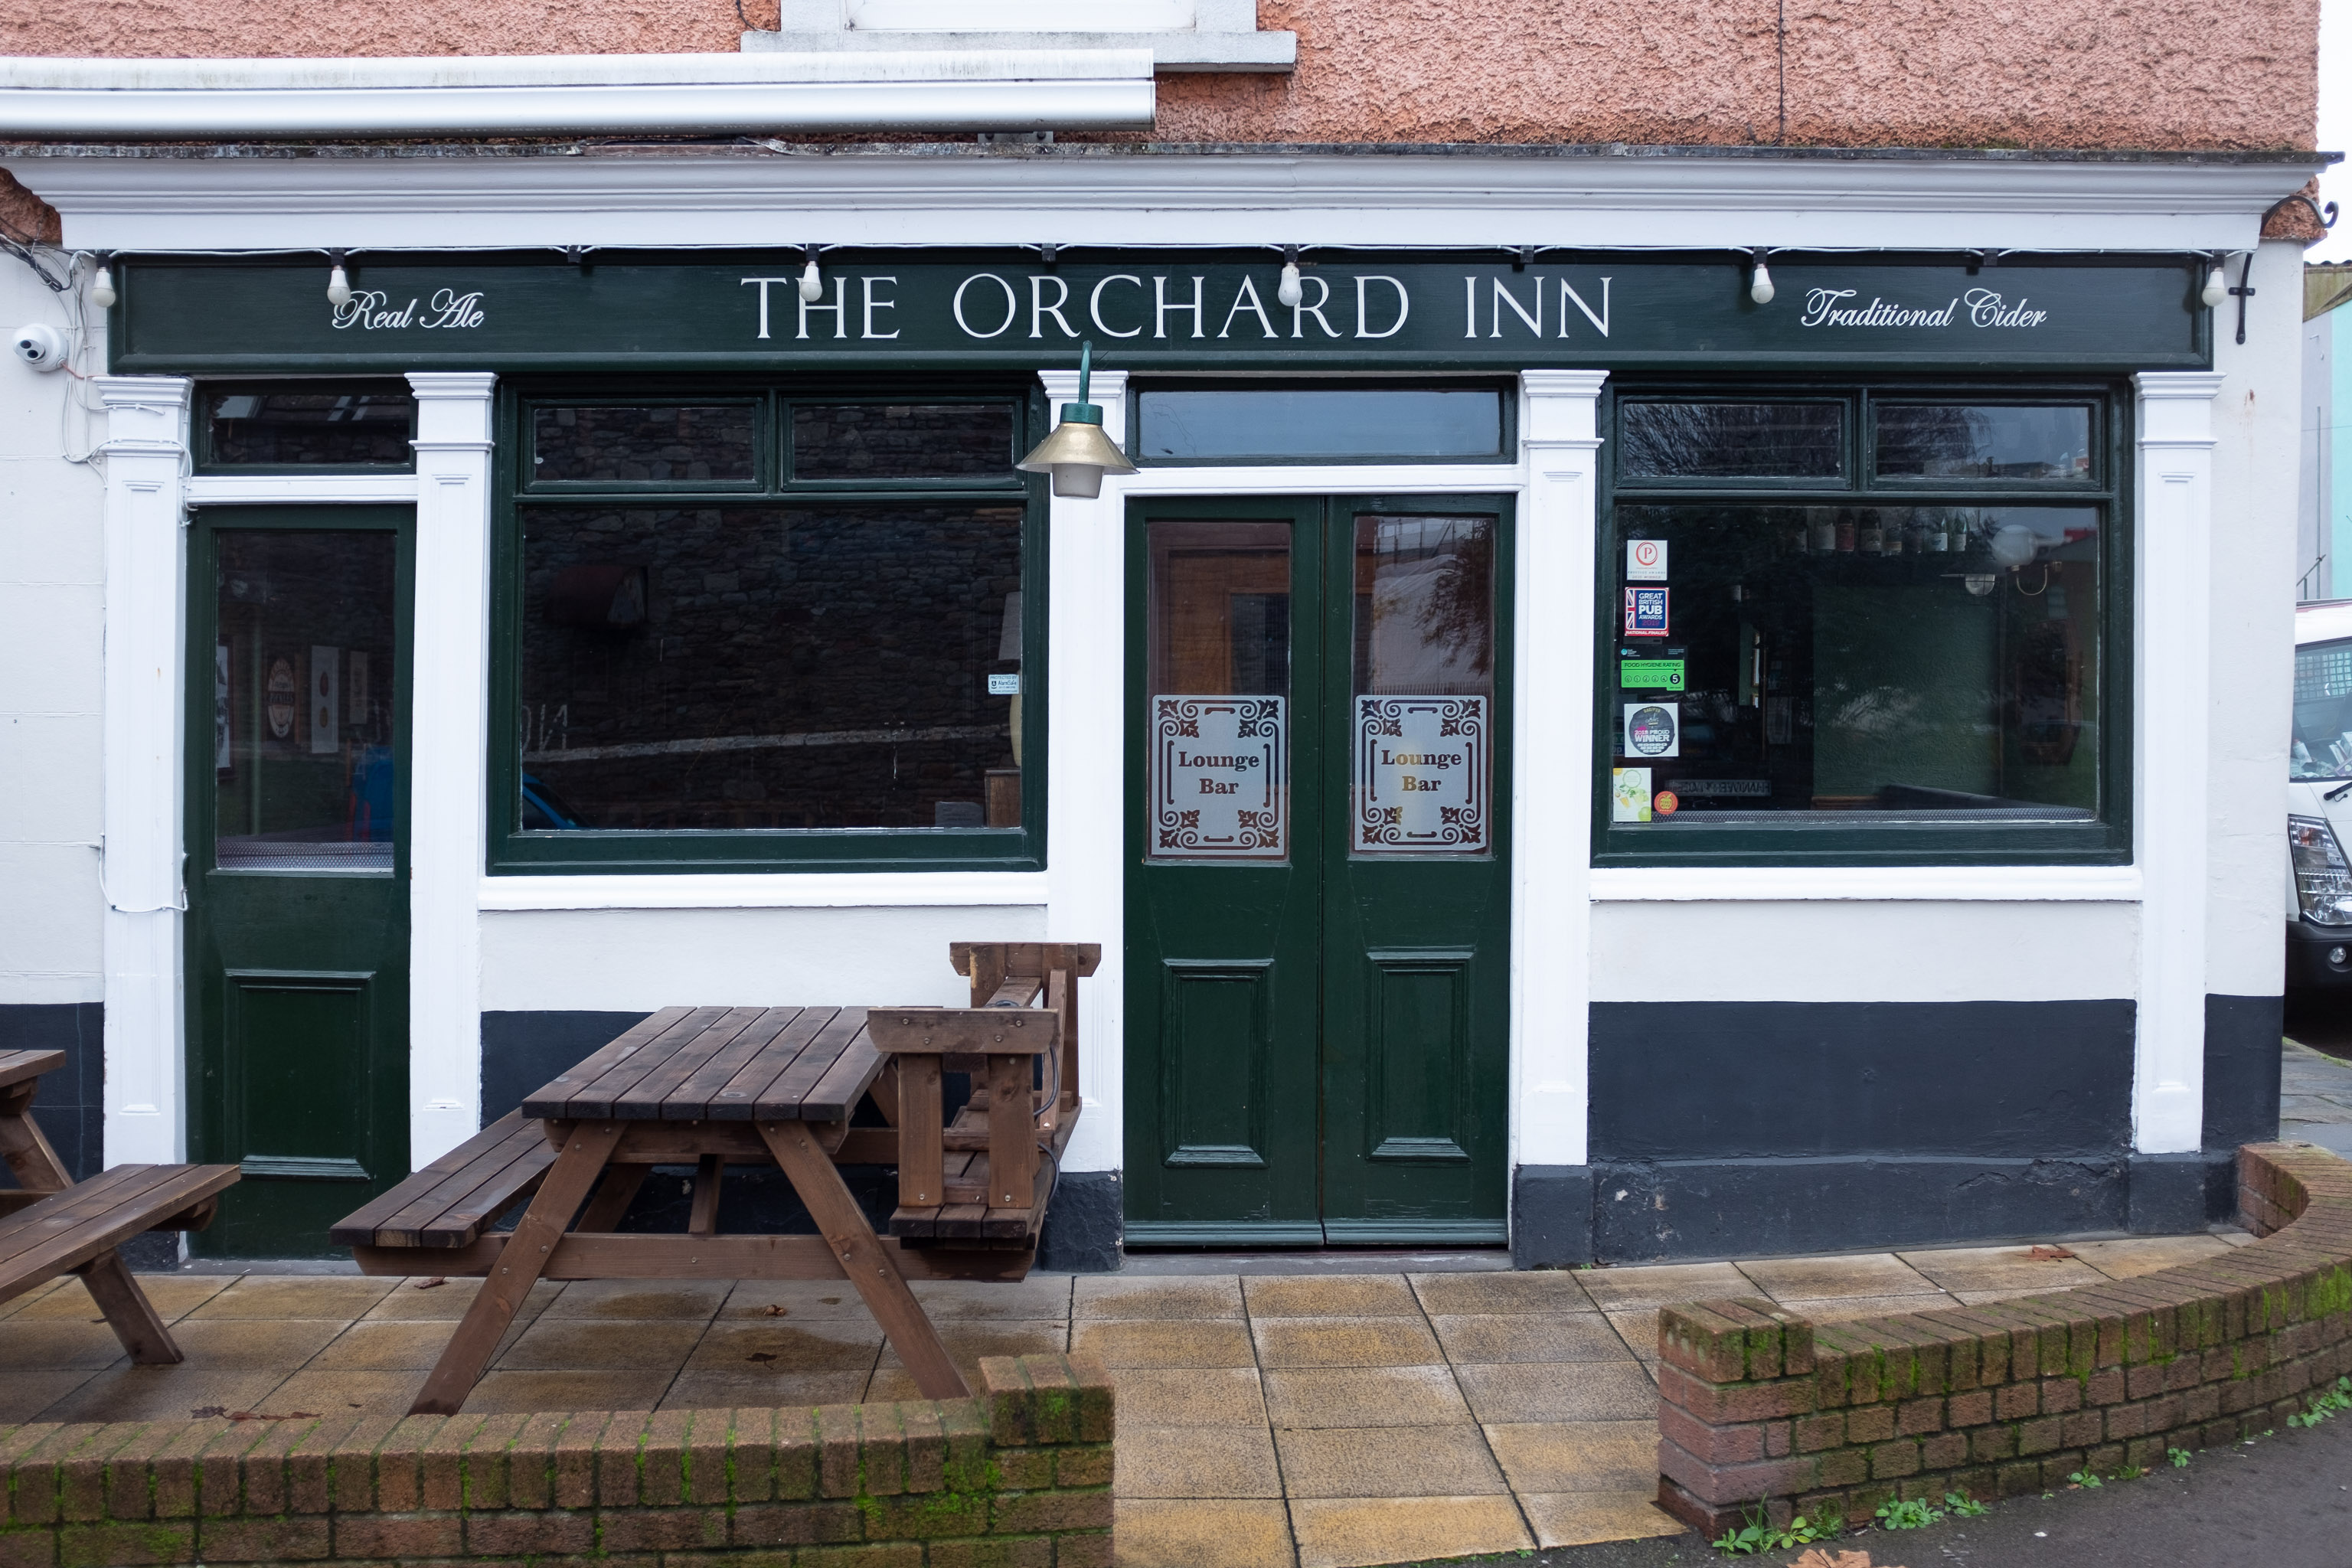 The Orchard
Must be going through some hard times at the moment. I've been in a few times since I used to live at Baltic Wharf in the mid-nineties, and it's al...